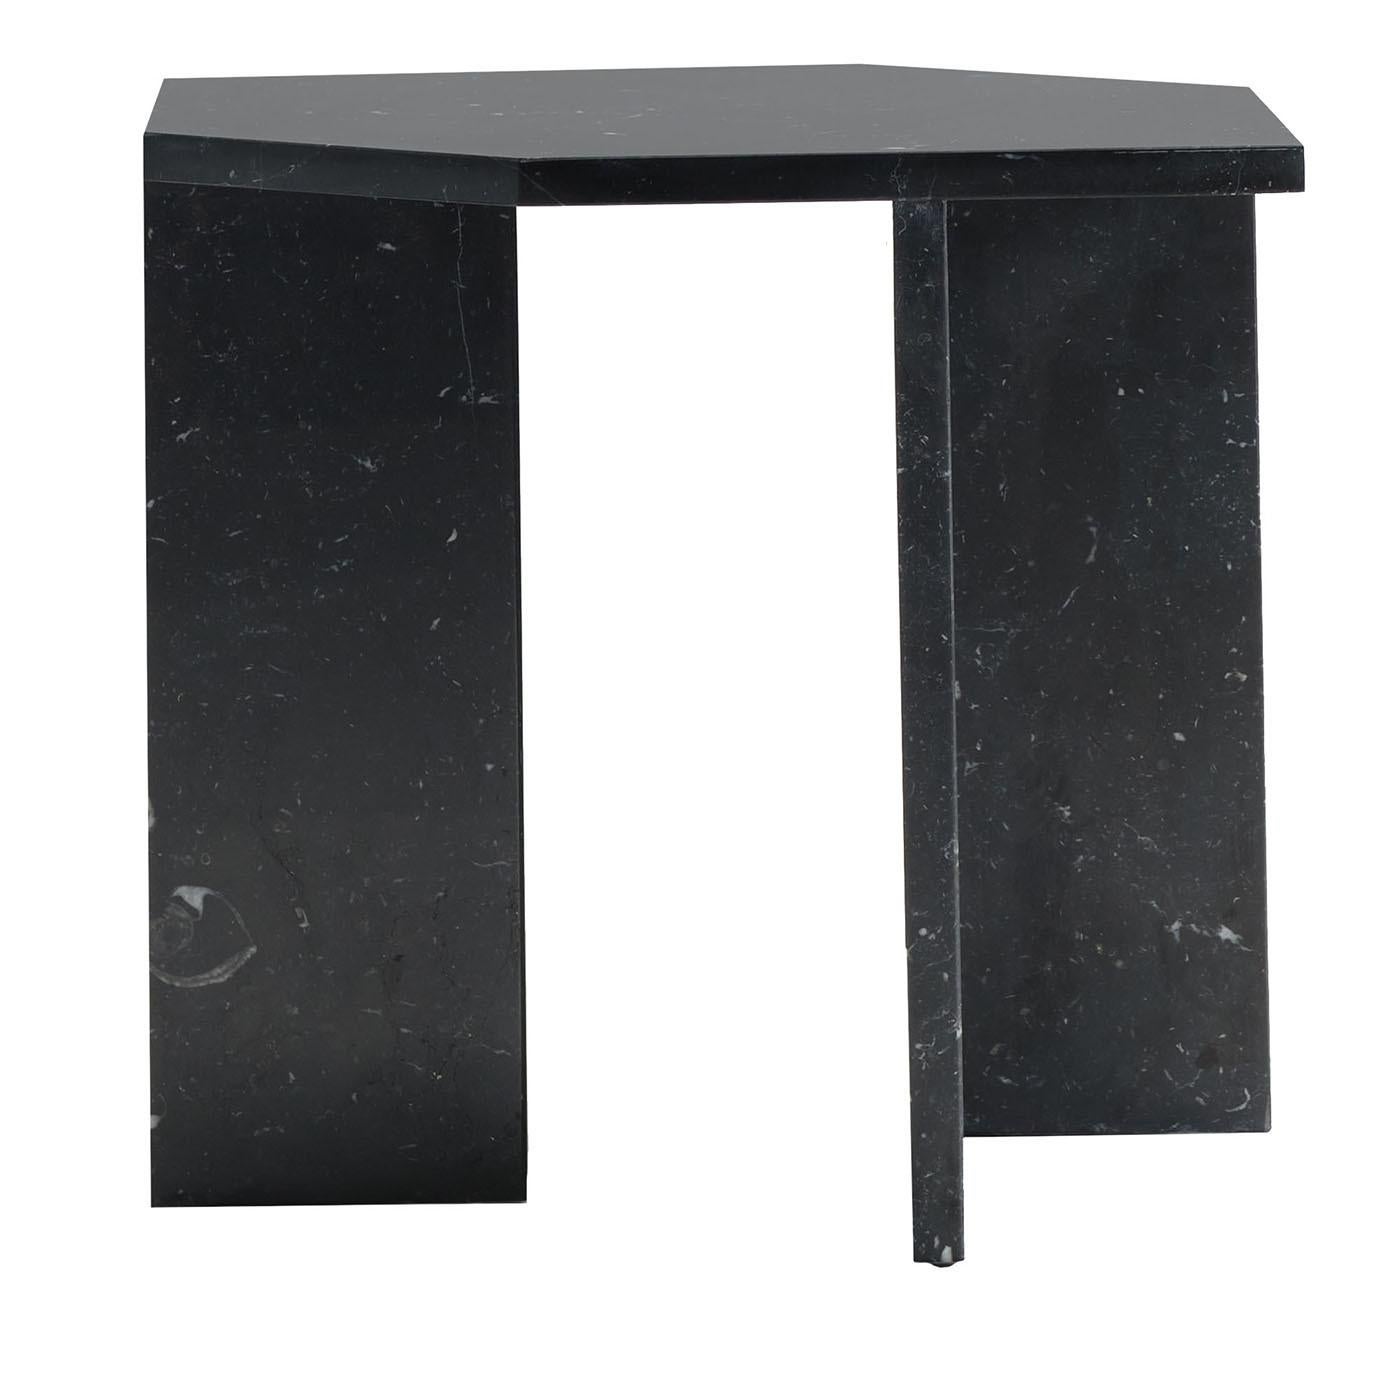 Slabs of prized glossy black Marquinia marble are the ones cleverly assembled to craft this sculptural coffee table of unmistakable geometric inspiration. Raised on angular legs somehow recalling cubes' profiles, the elongated hexagonal top